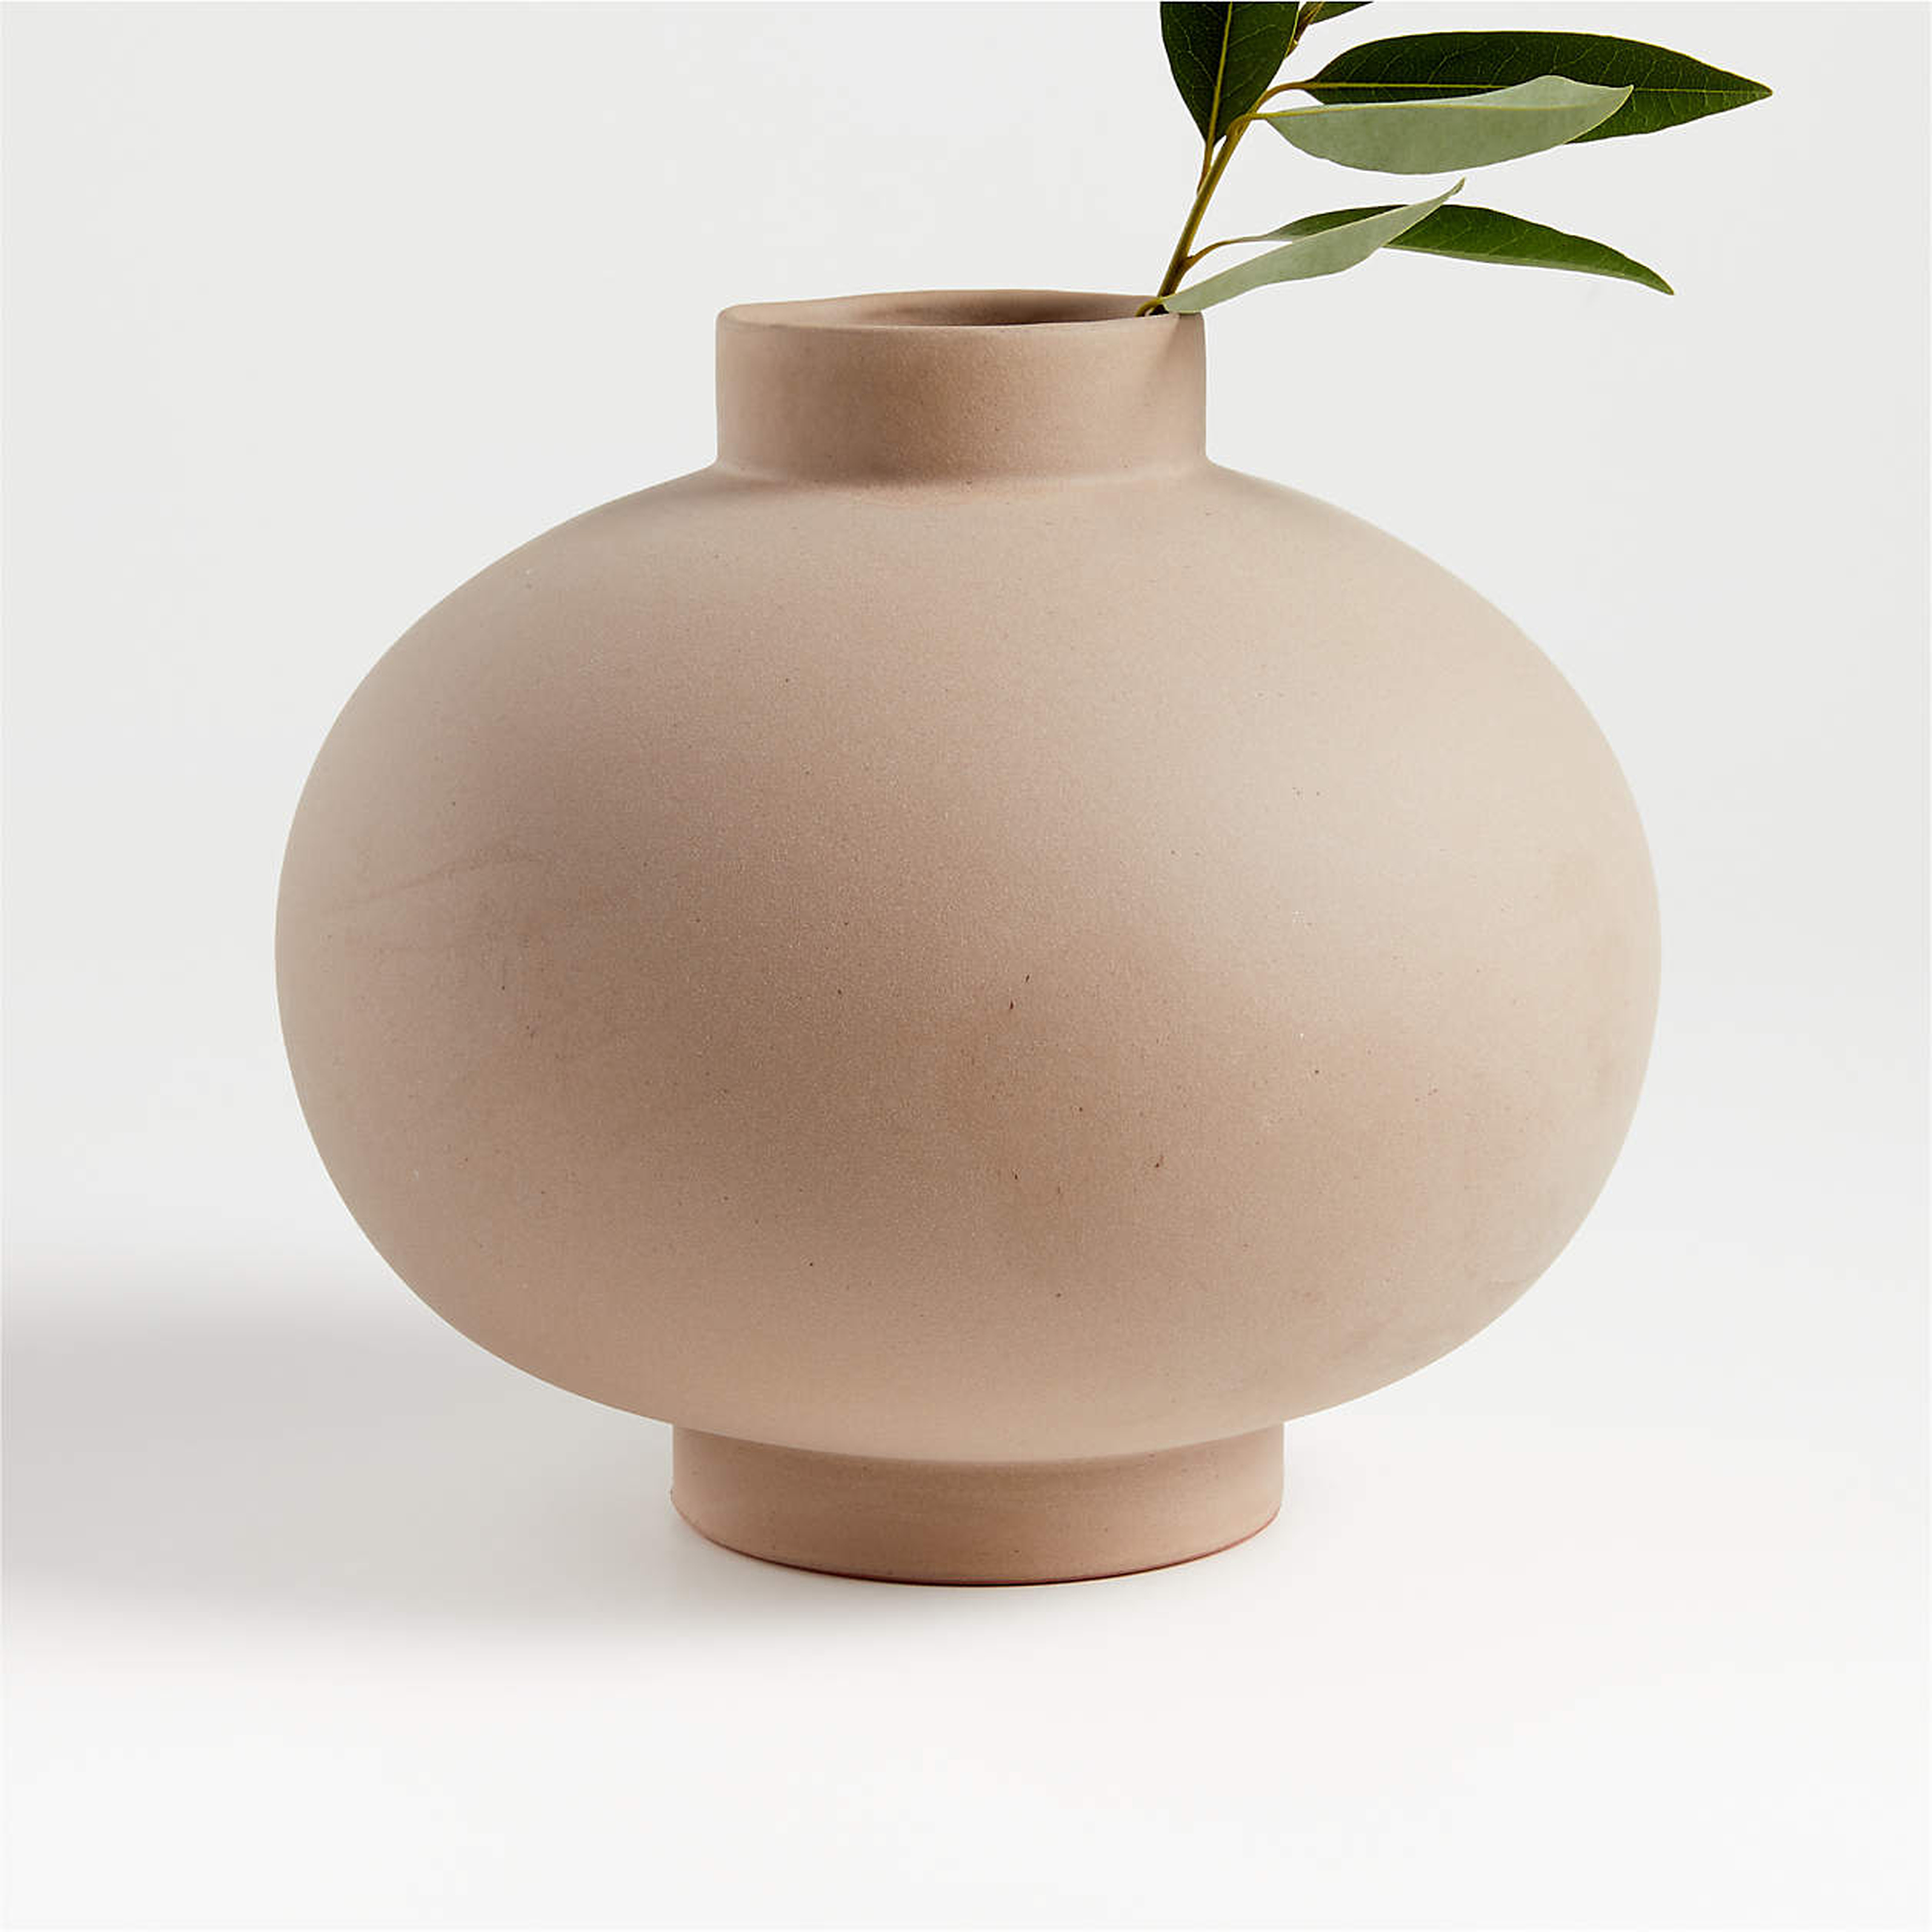 Full Moon Clay Vase - Crate and Barrel